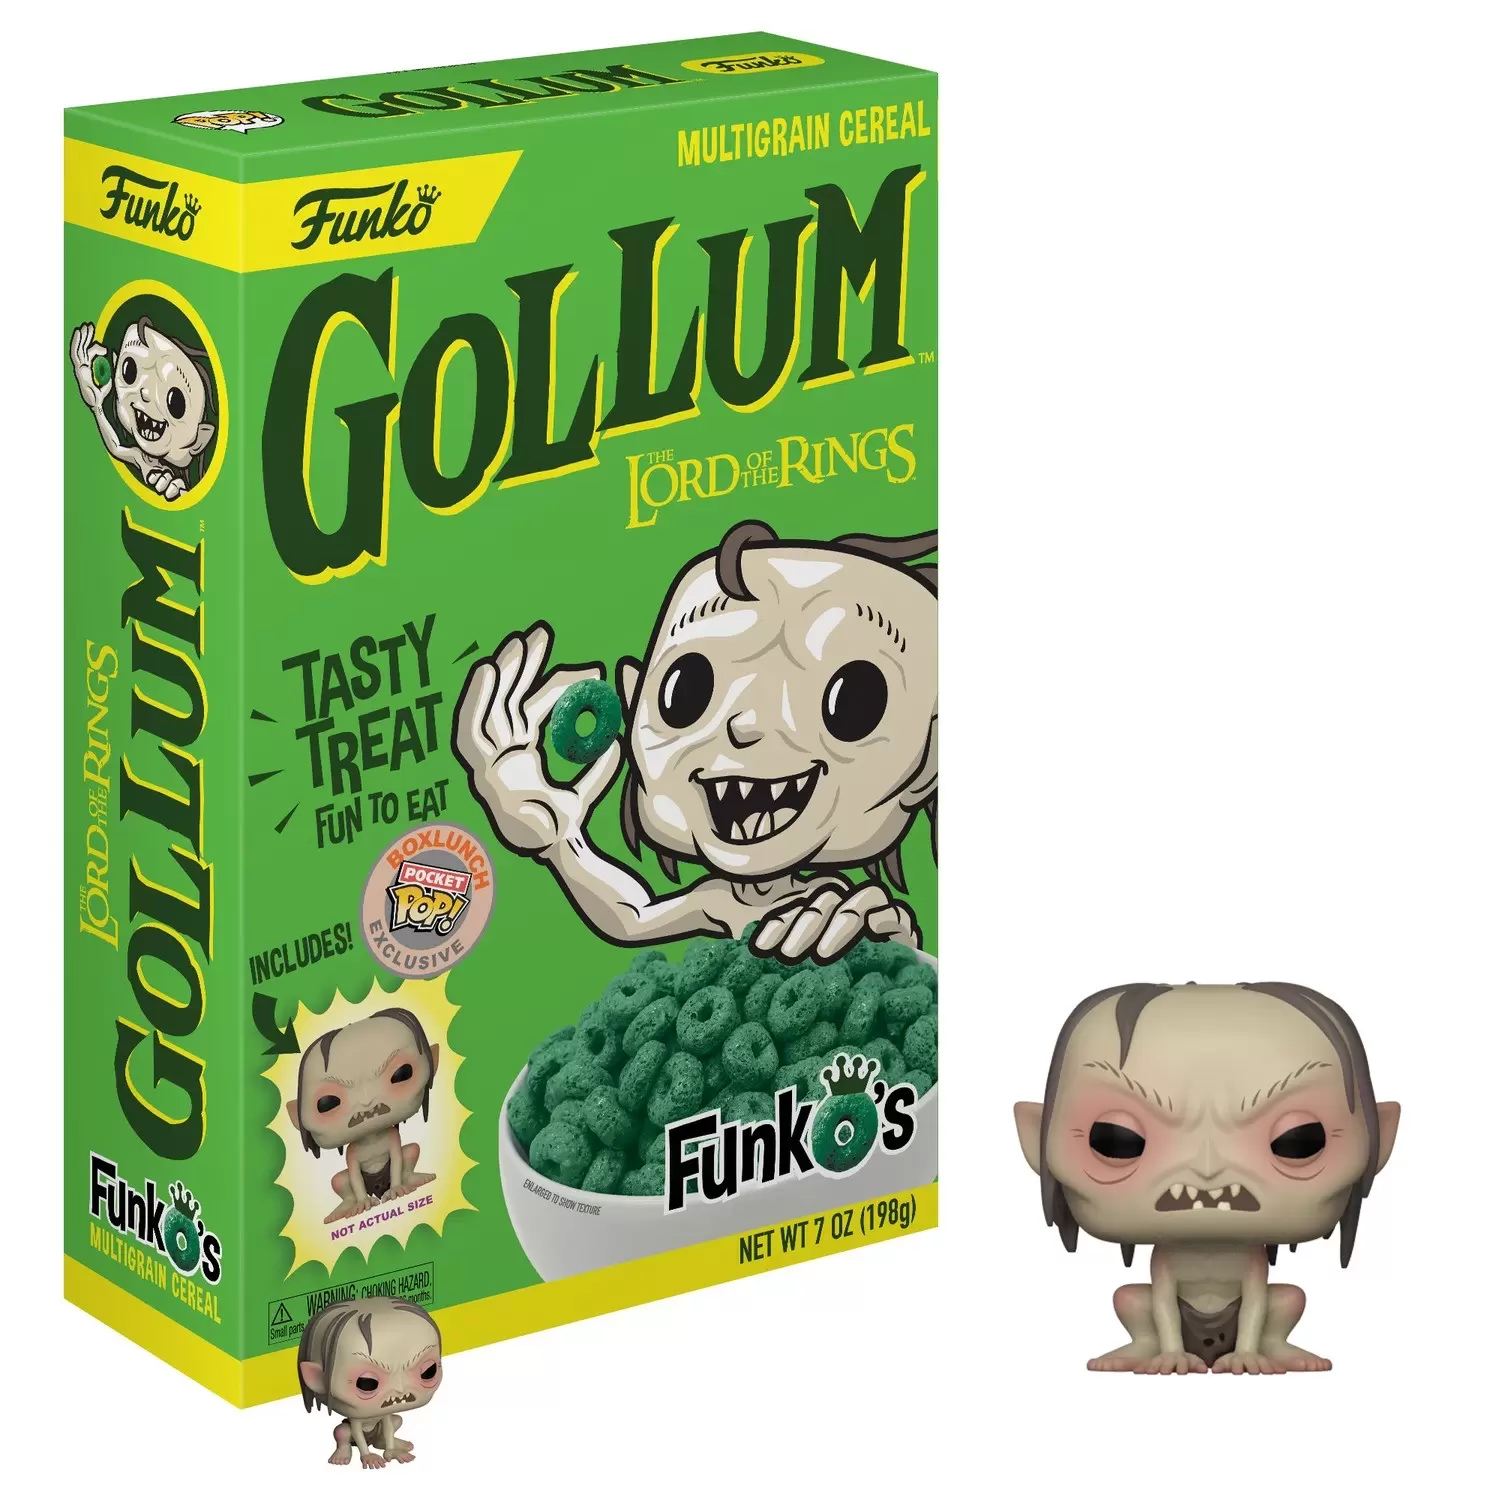 Pocket Pop! and Pop Minis! - The Lord of the Rings - Gollum